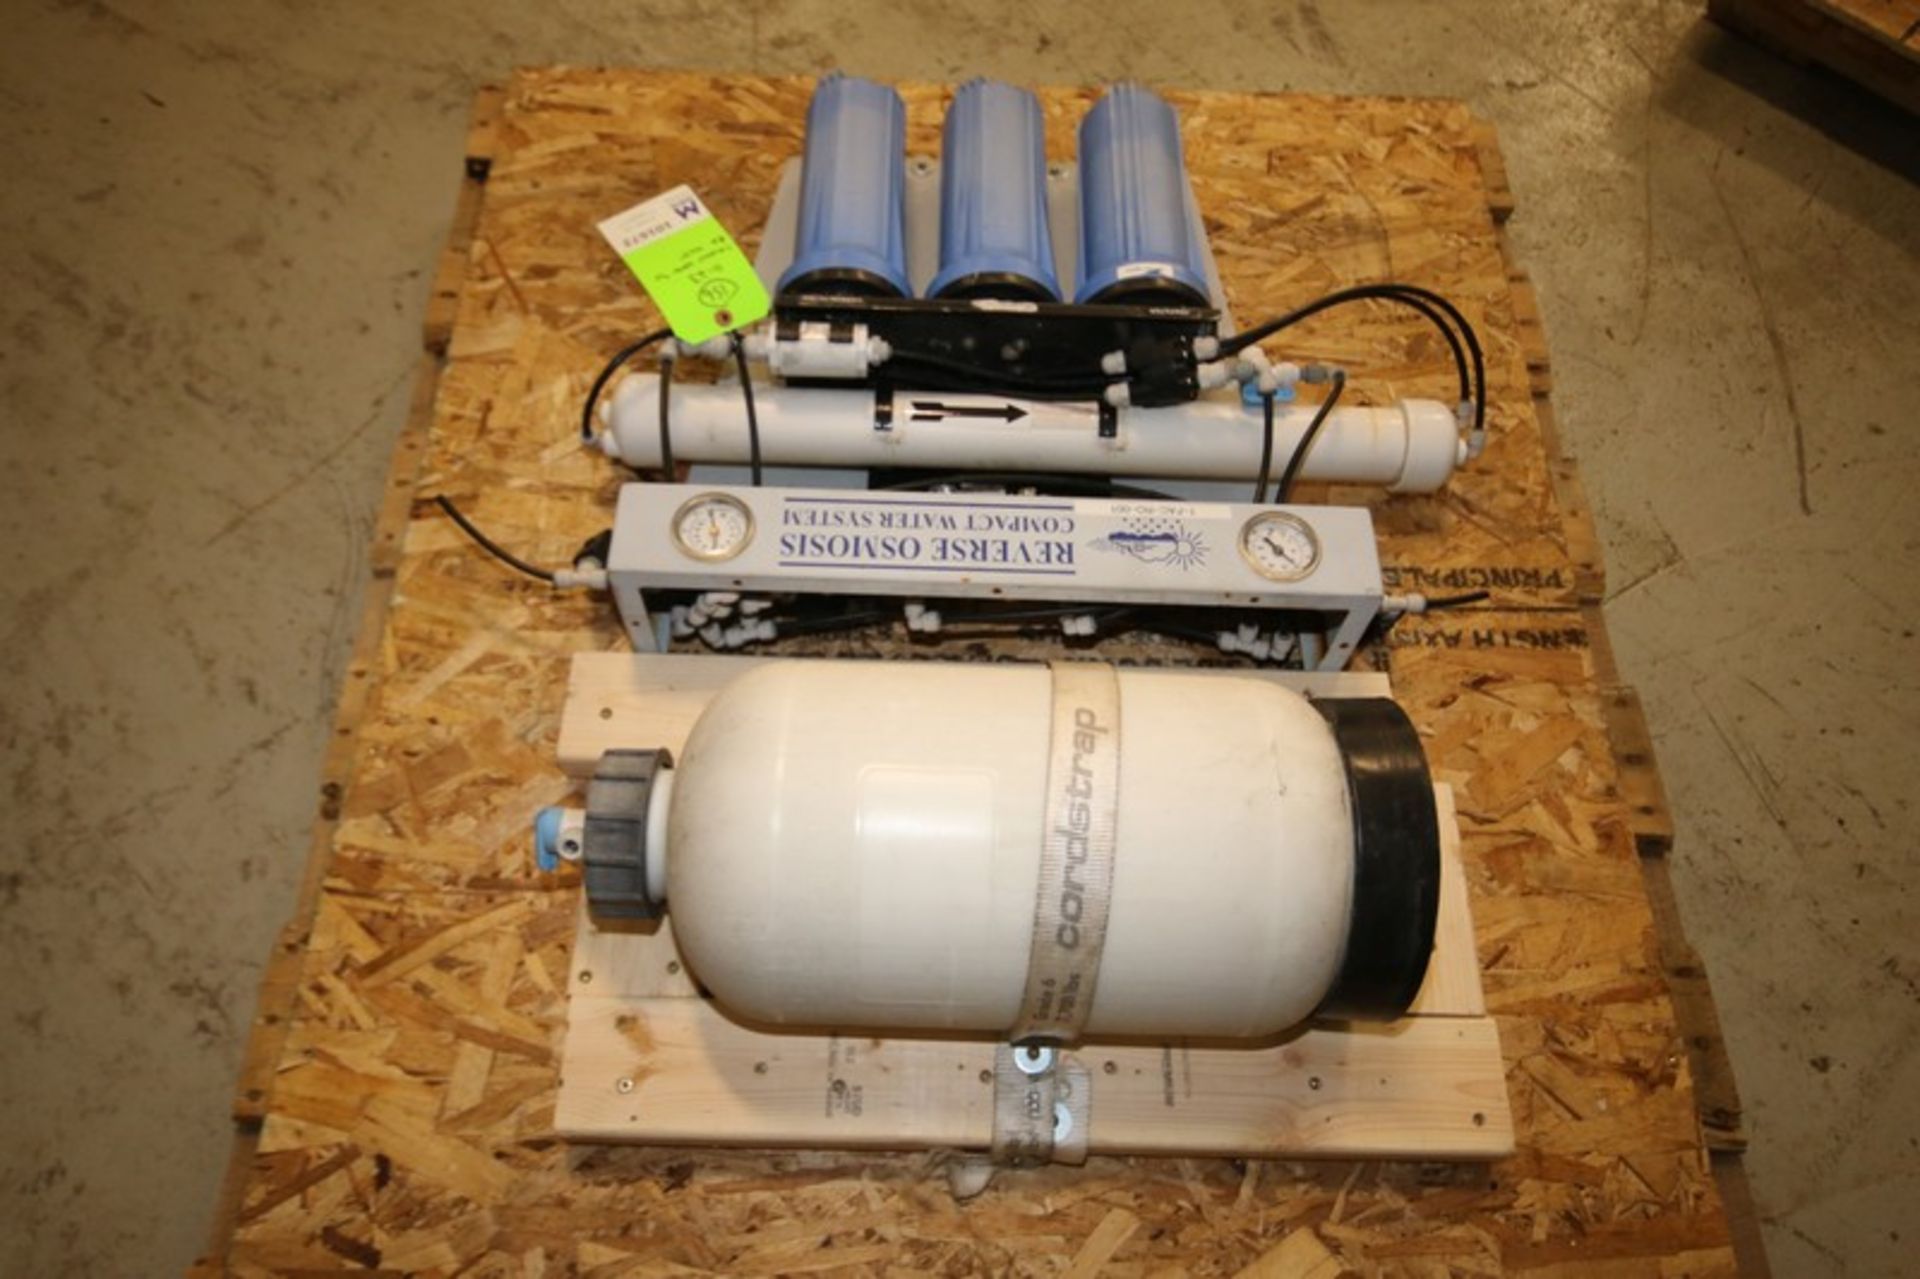 Compact Water System Wall Mounted RO System, Model LP-80, SN 02023-80, with (3) Filters & Holding - Image 2 of 3